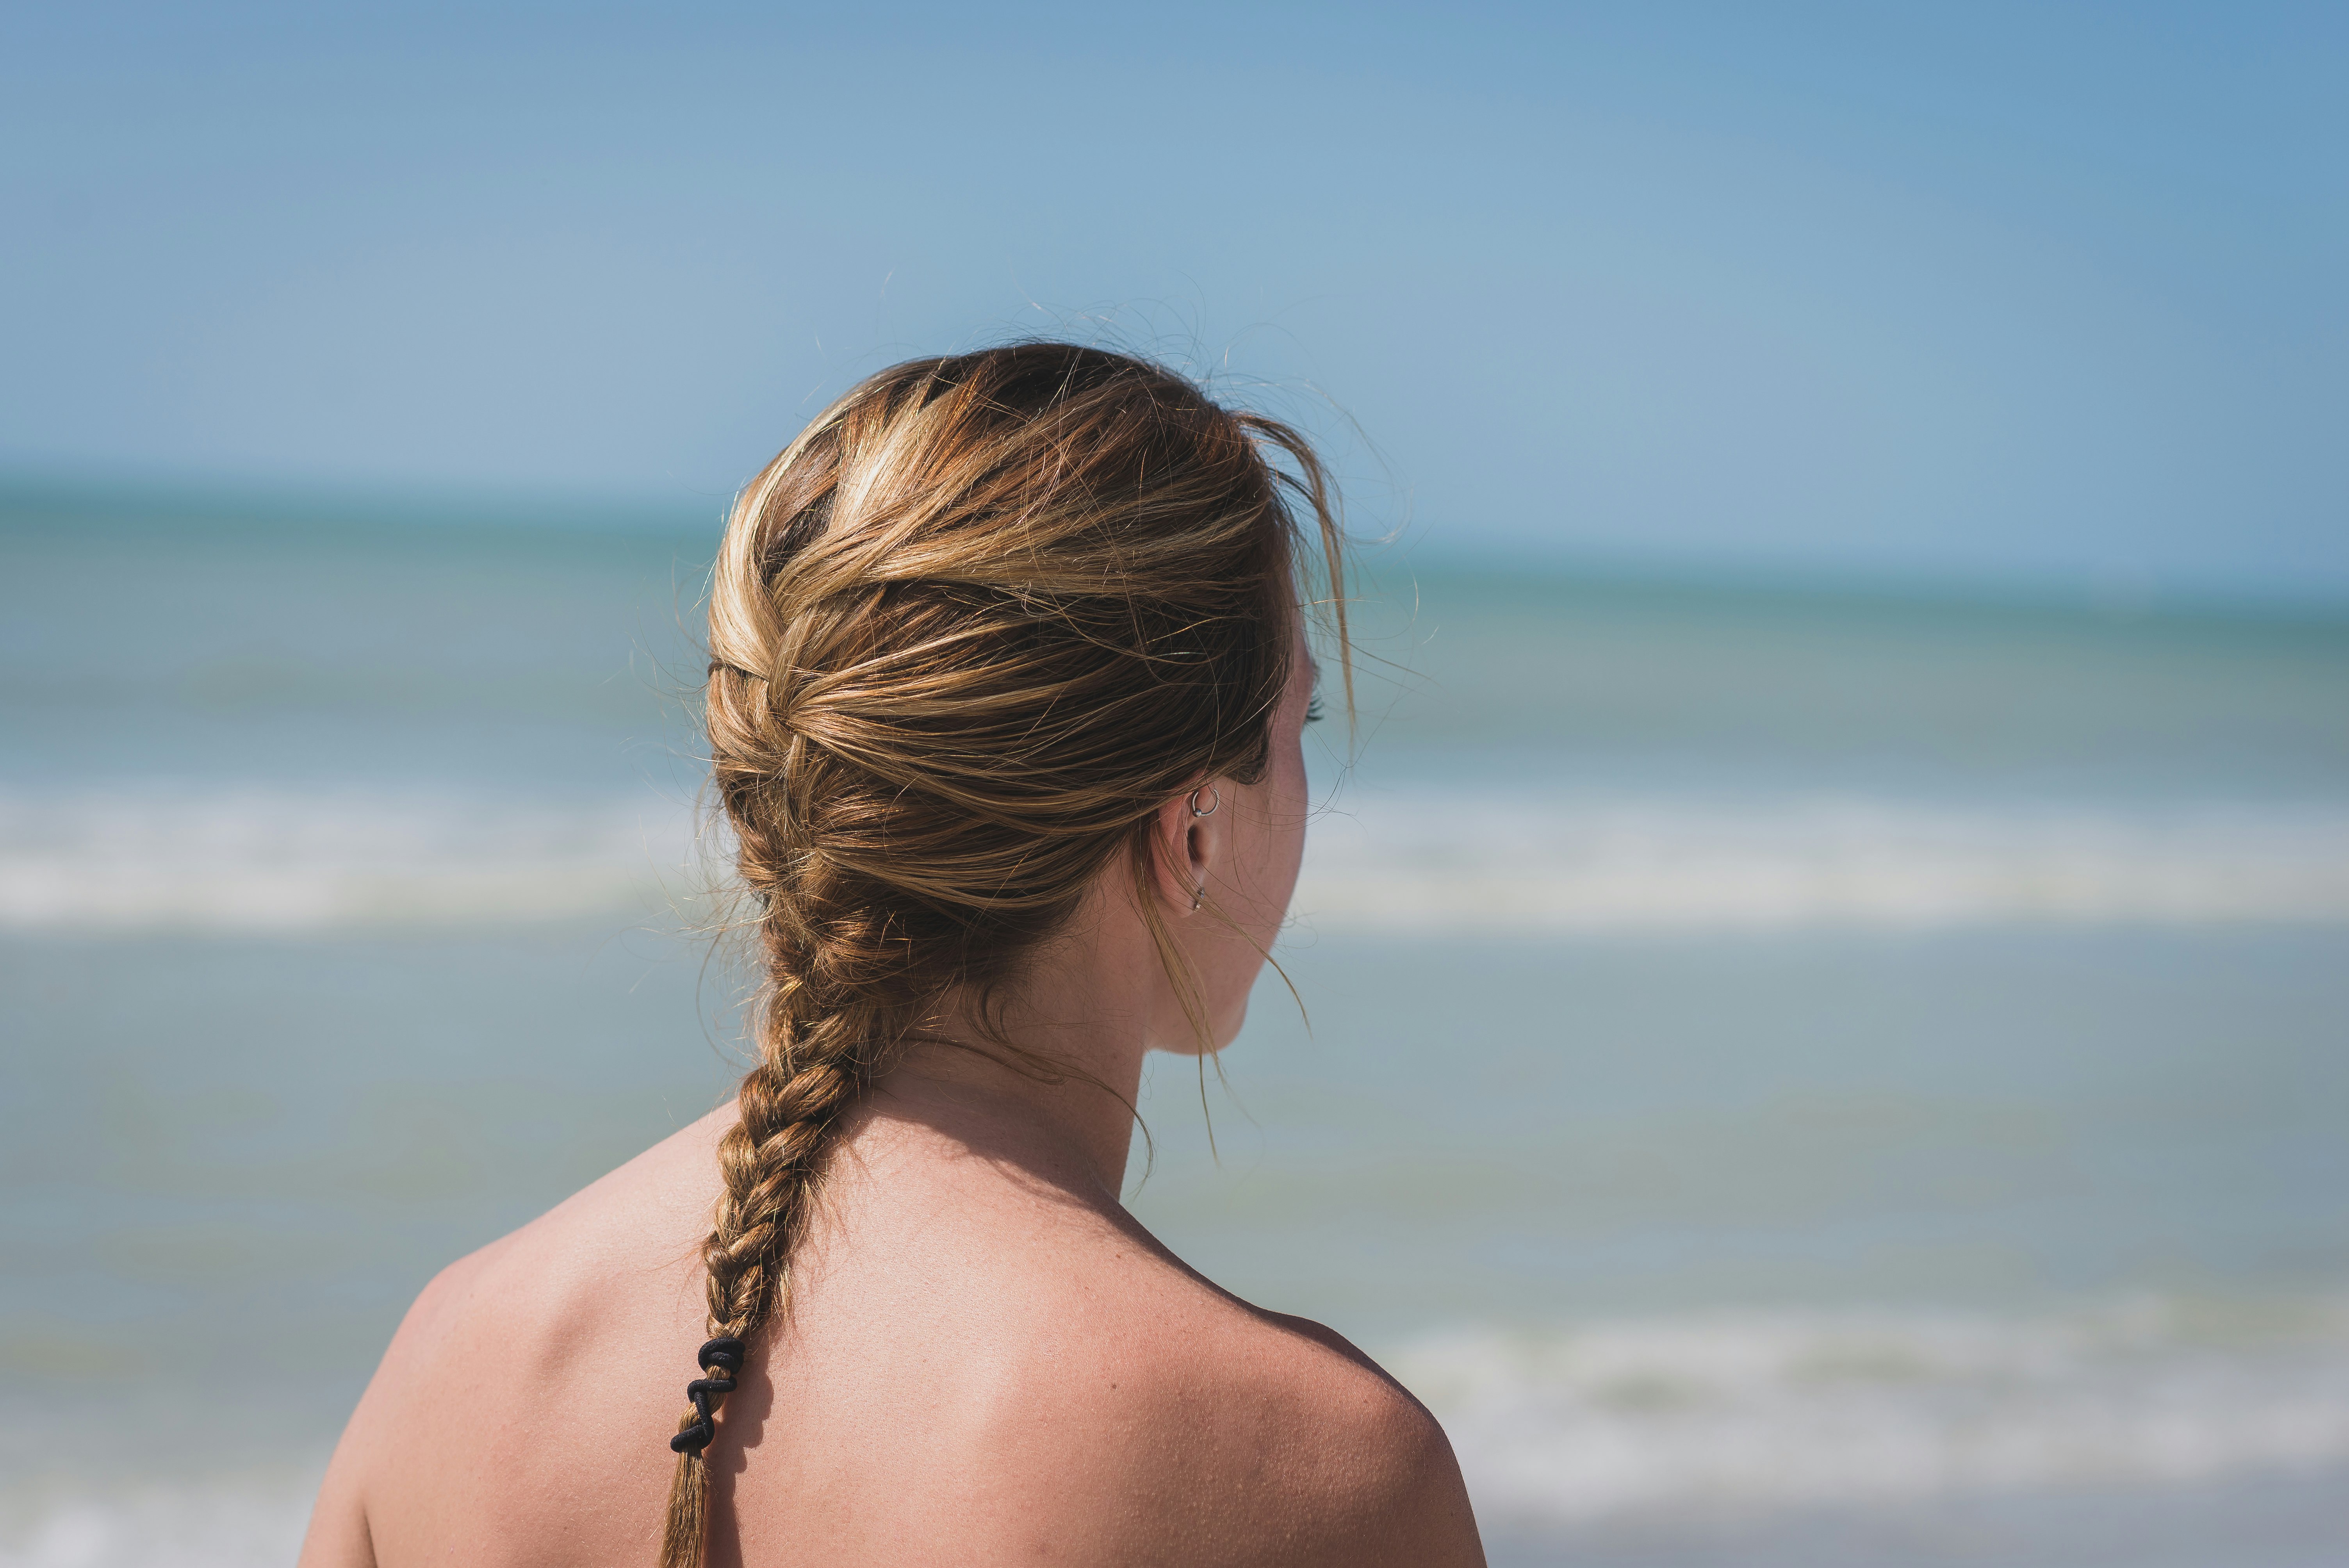 back view photo of woman with braided hair near sea